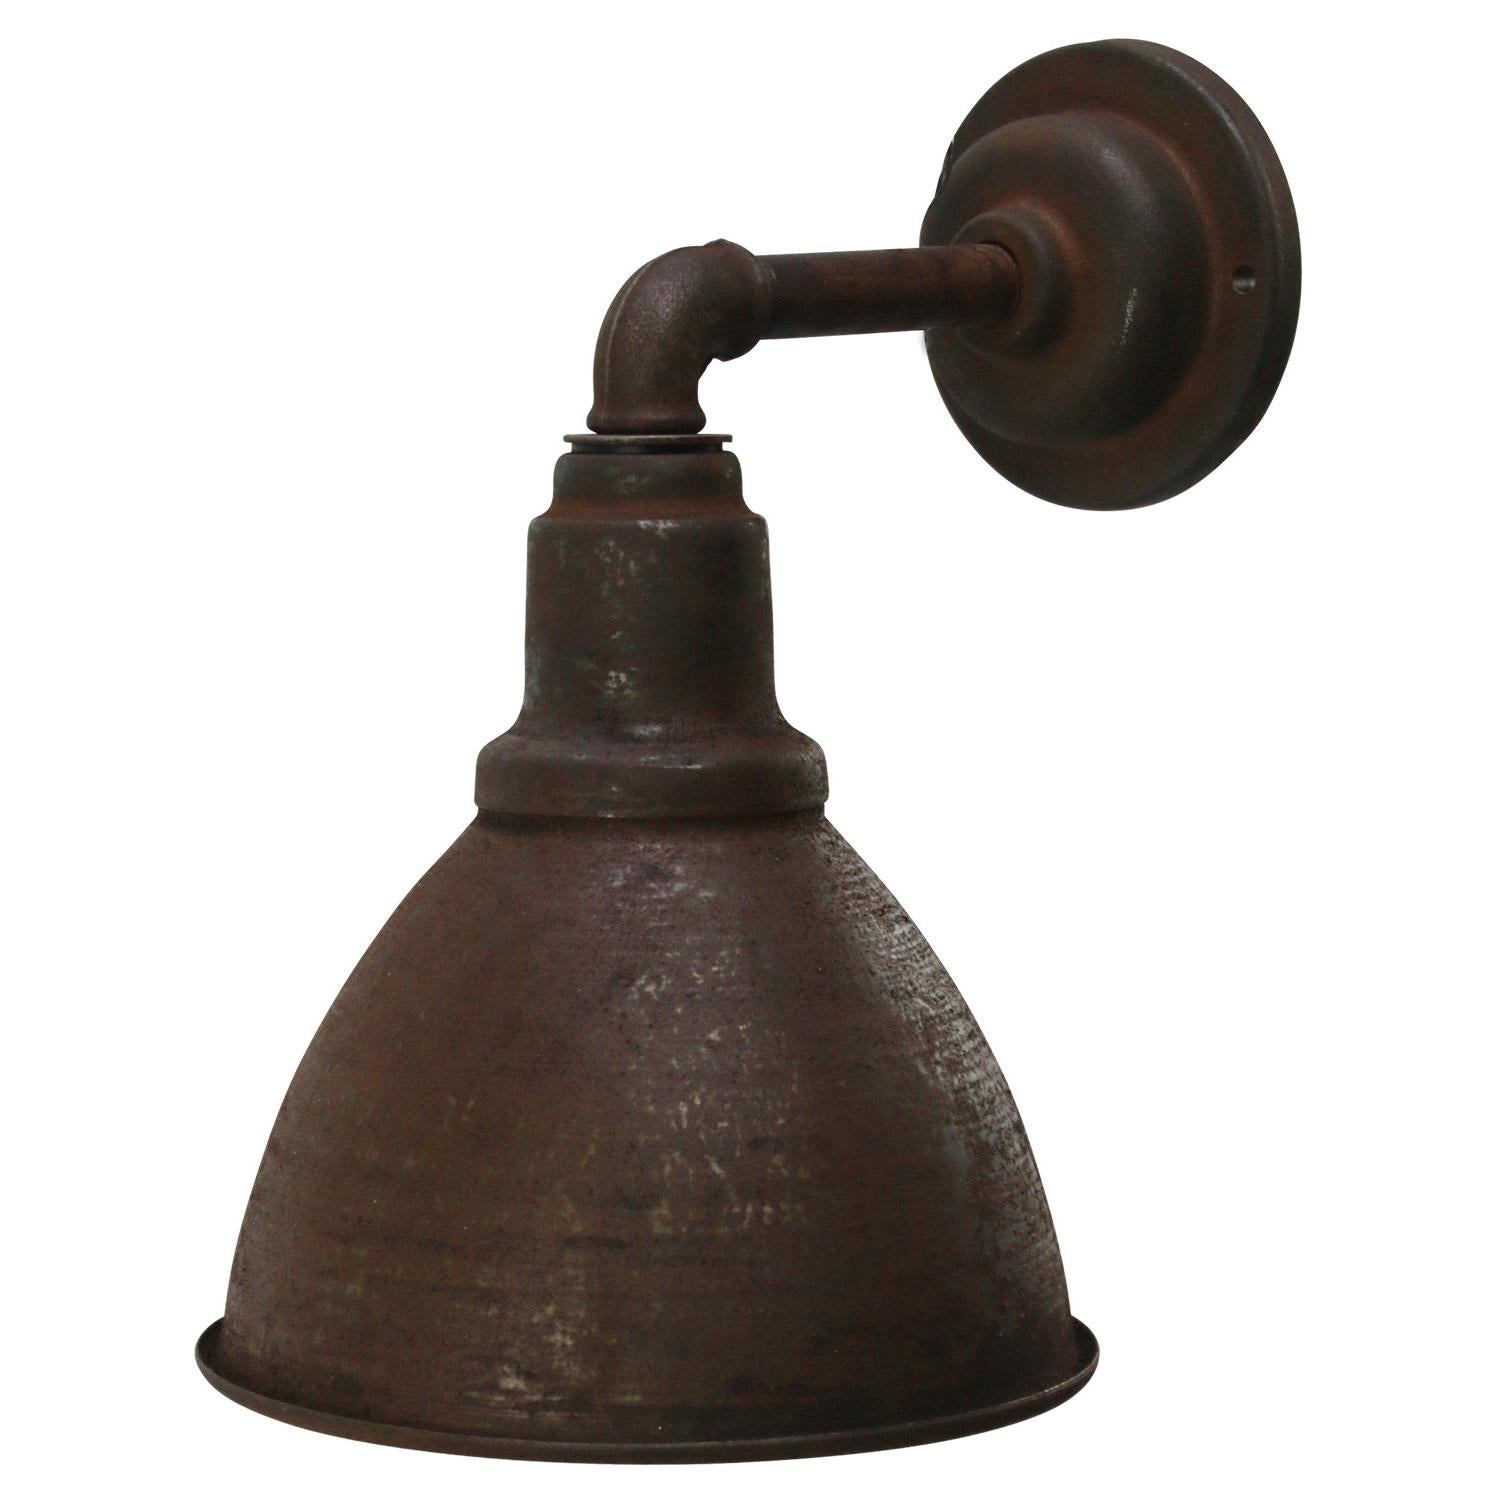 Factory wall light
Iron shade, cast iron arm and wall base

diameter cast iron wall piece: 10.5 cm / 4”, 2 holes to secure

Weight: 1.80 kg / 4 lb

Priced per individual item. All lamps have been made suitable by international standards for